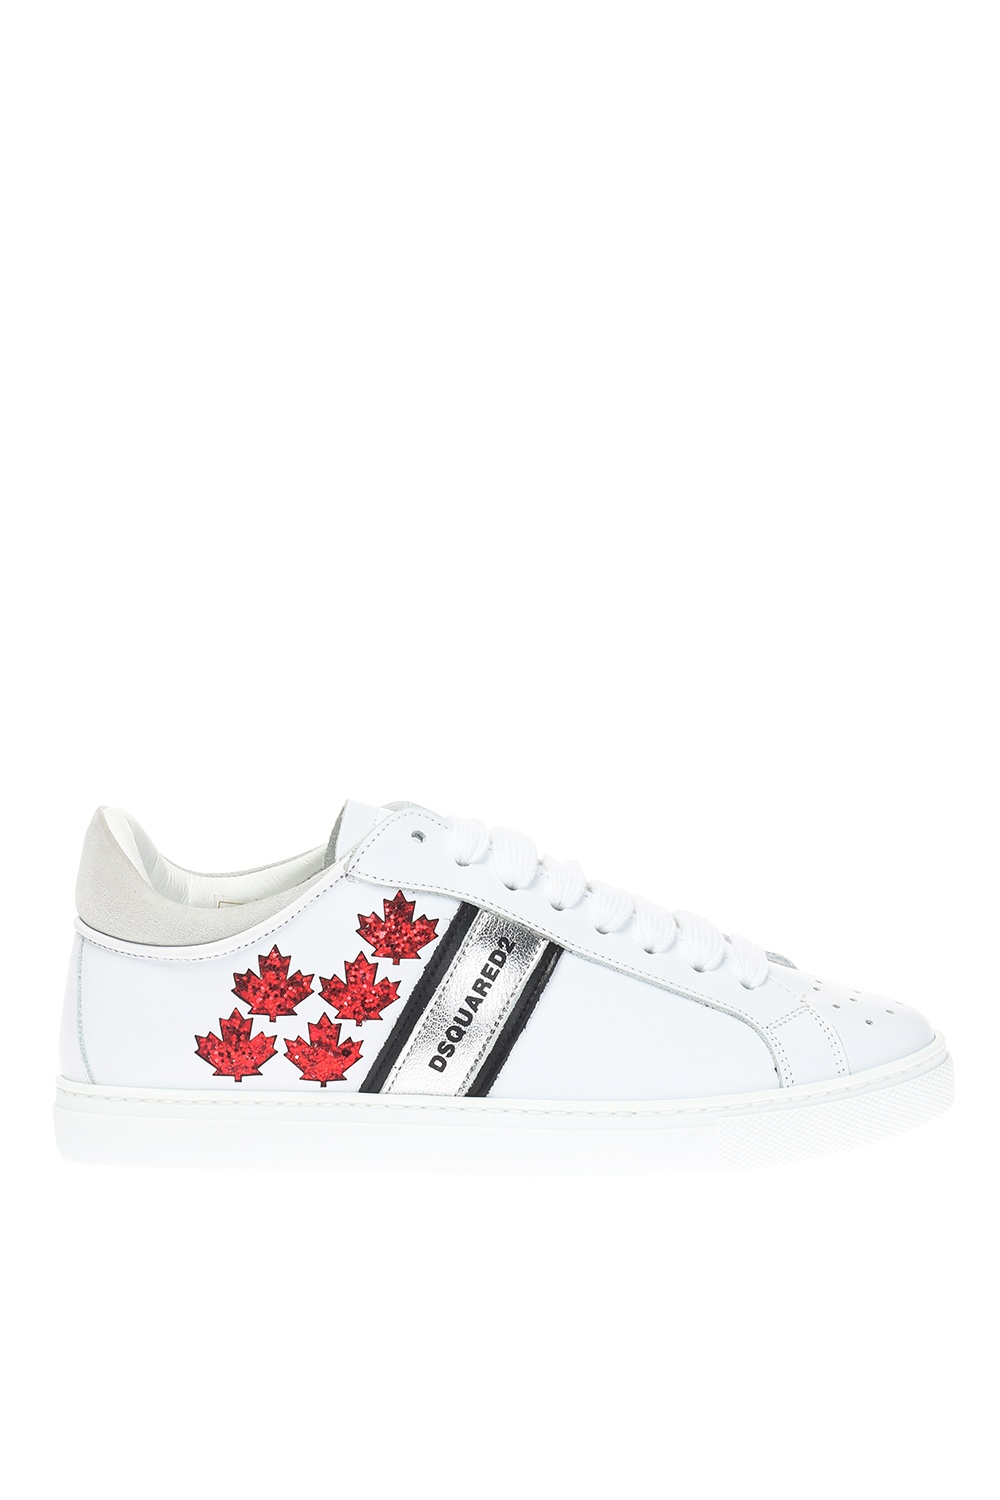 dsquared shoes canada